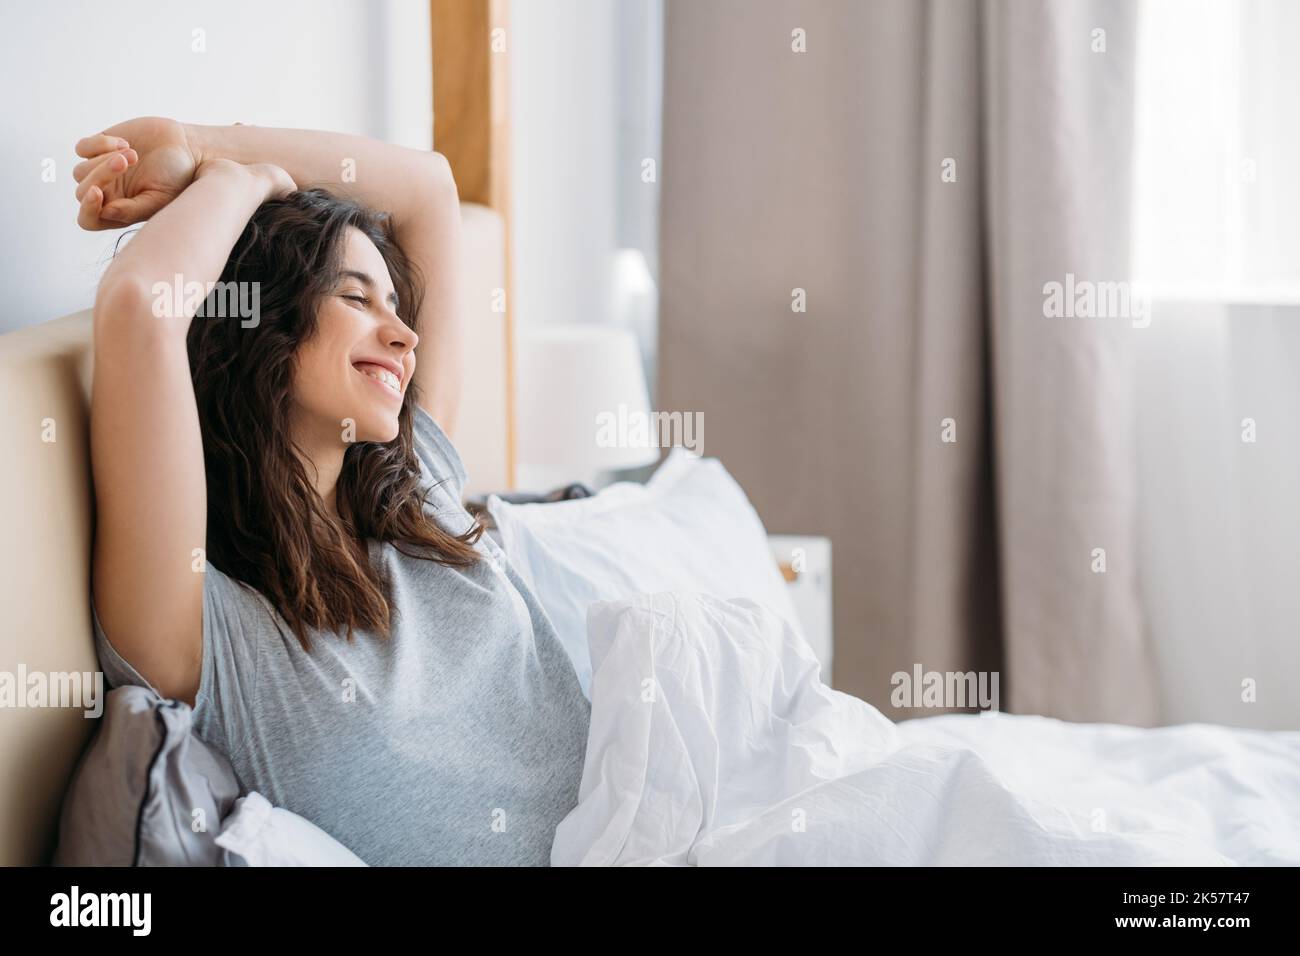 Happy morning. Home relaxation. Positive lifestyle. Satisfied cheerful brunette woman enjoying rest alone in cozy bed smiling in light bedroom. Stock Photo